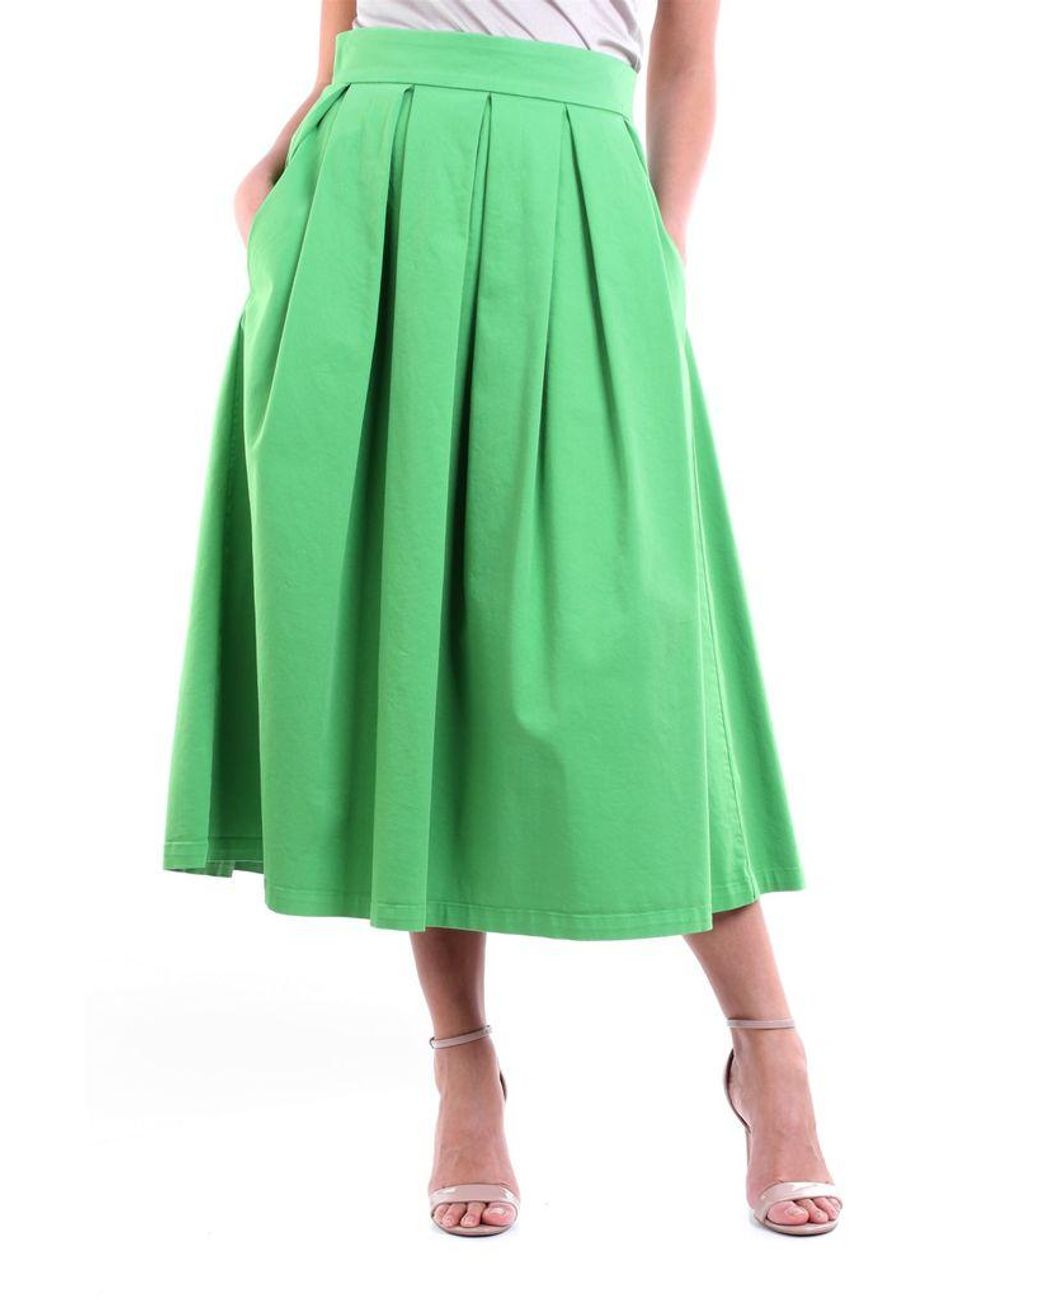 Department 5 Synthetic Department 5 Skirts Midi in Green - Lyst